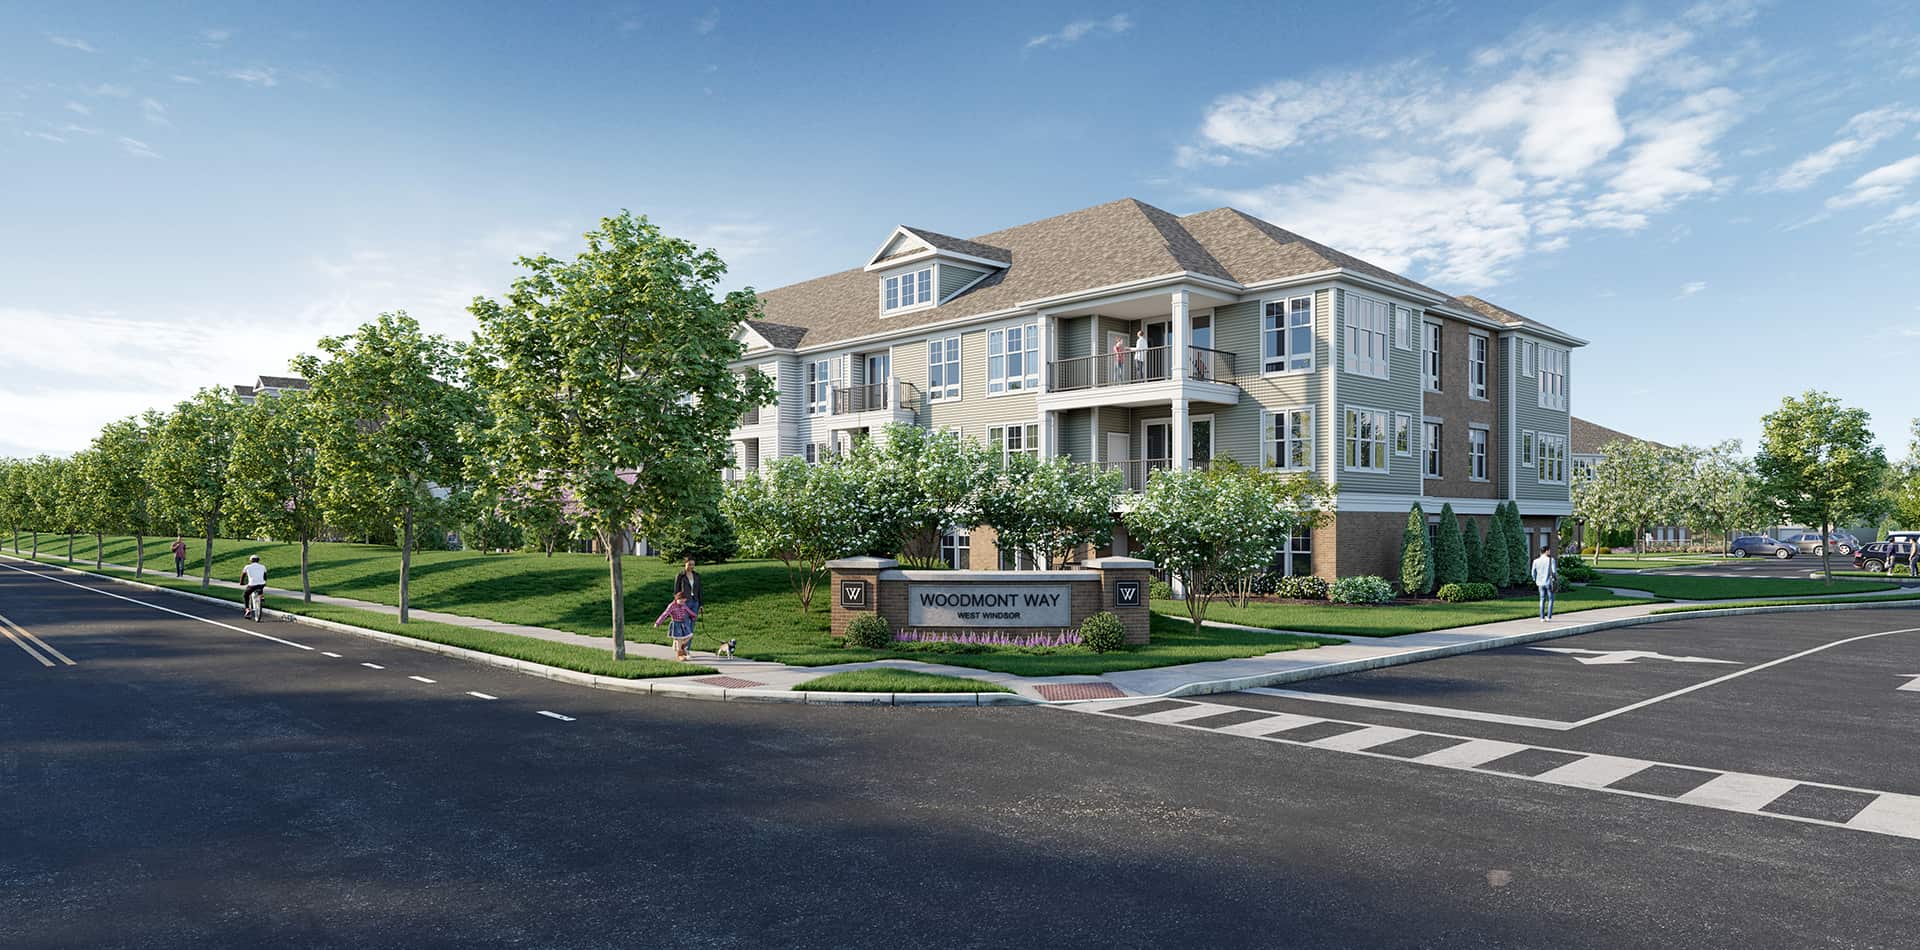 New apartment complex behind MarketFair set to open in West Windsor this summer